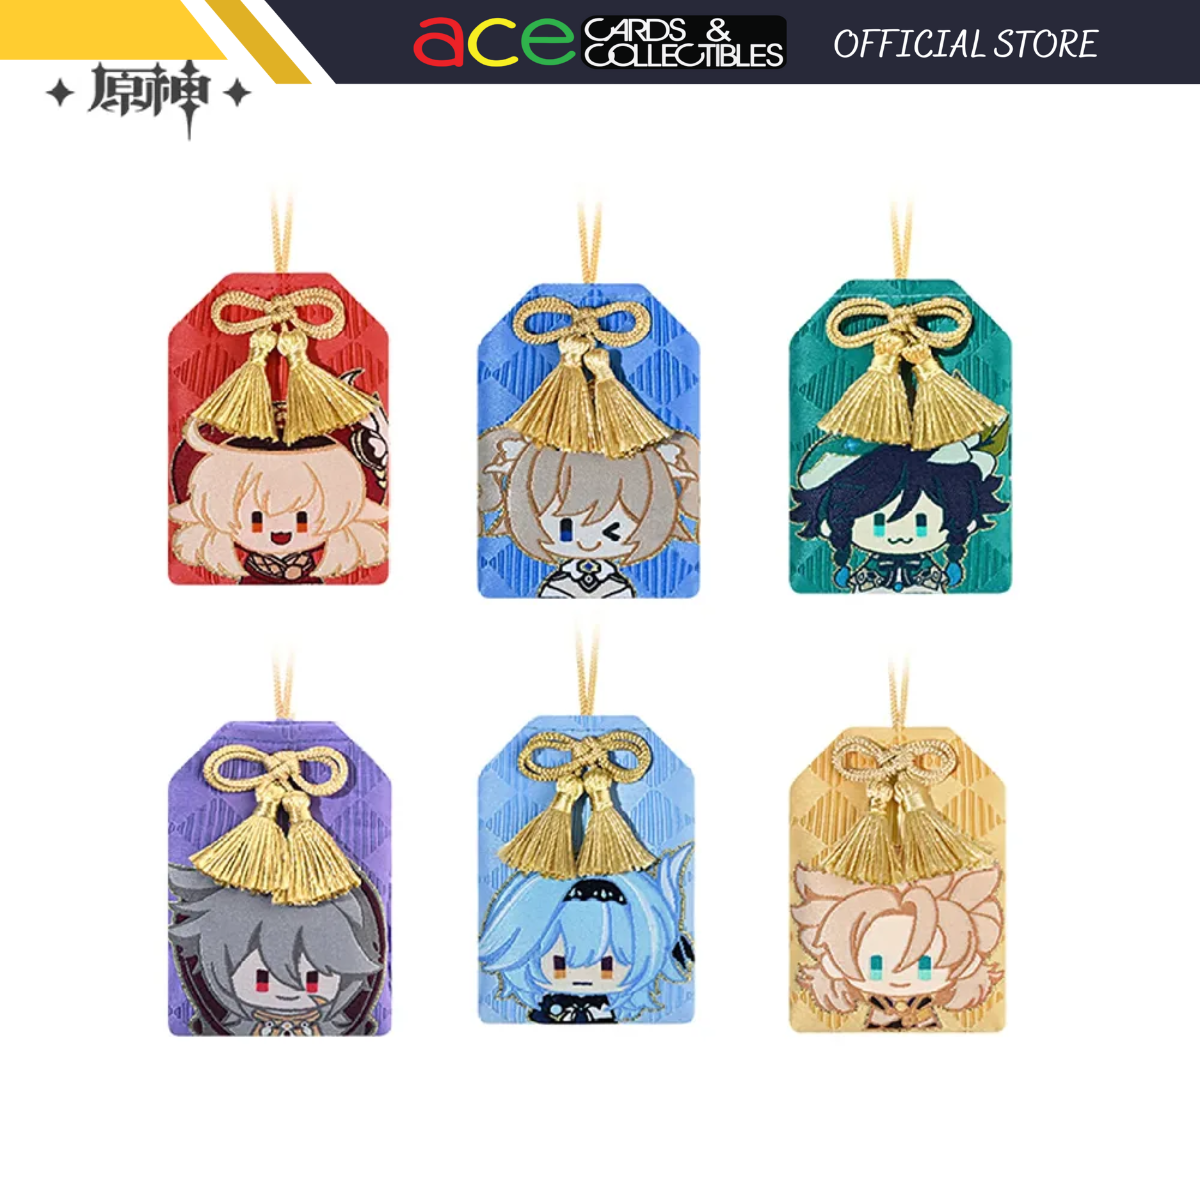 miHoYo Genshin Impact Mondstadt Character Omamori Charm-Klee-miHoYo-Ace Cards &amp; Collectibles